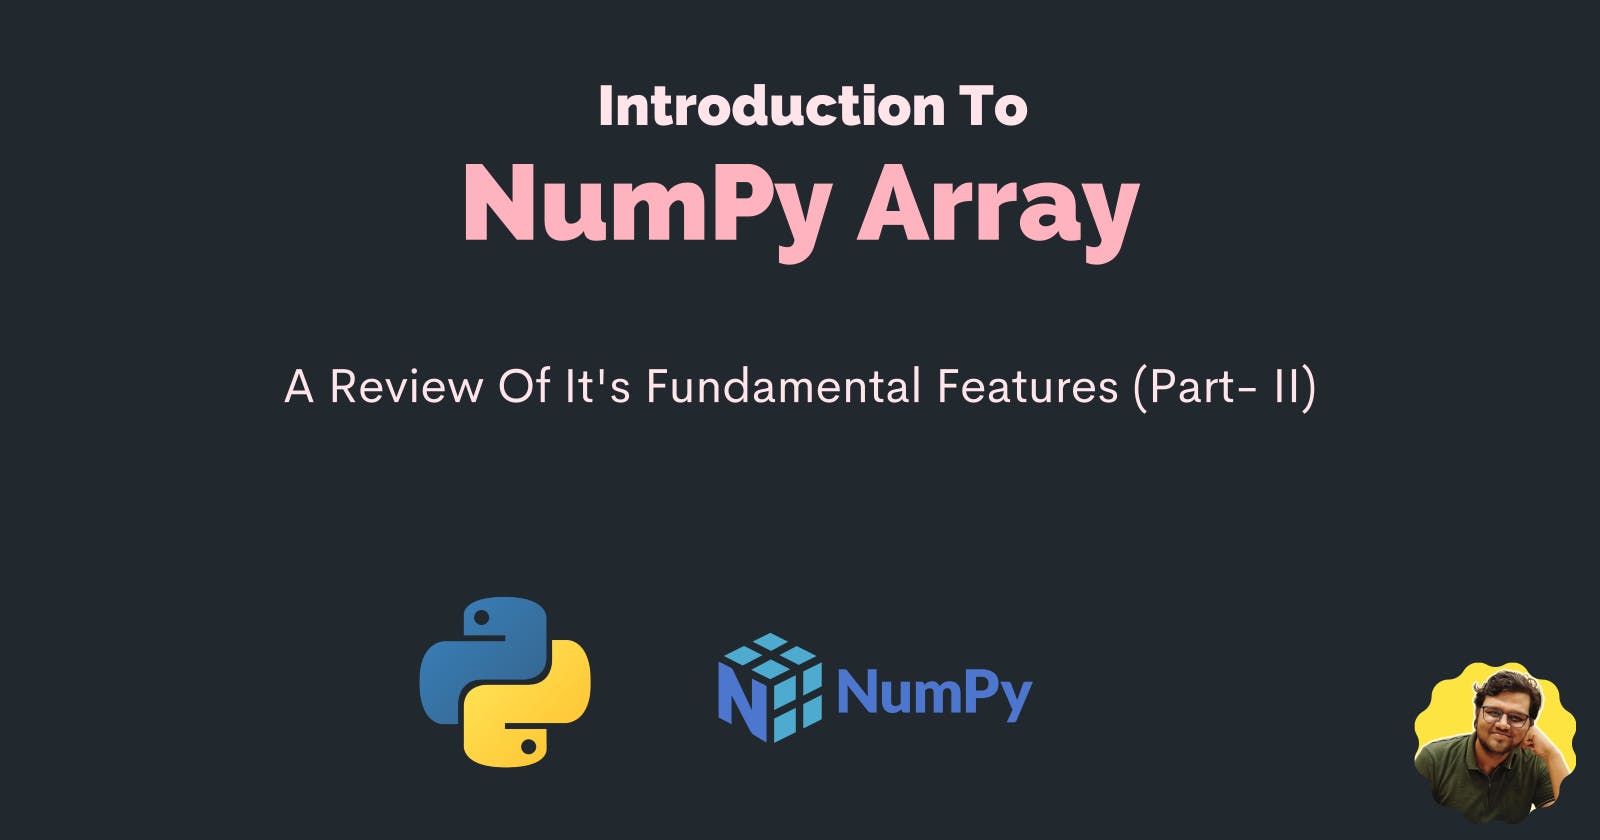 Introduction To NumPy Array: A Review Of It's Fundamental Features (Part- II)